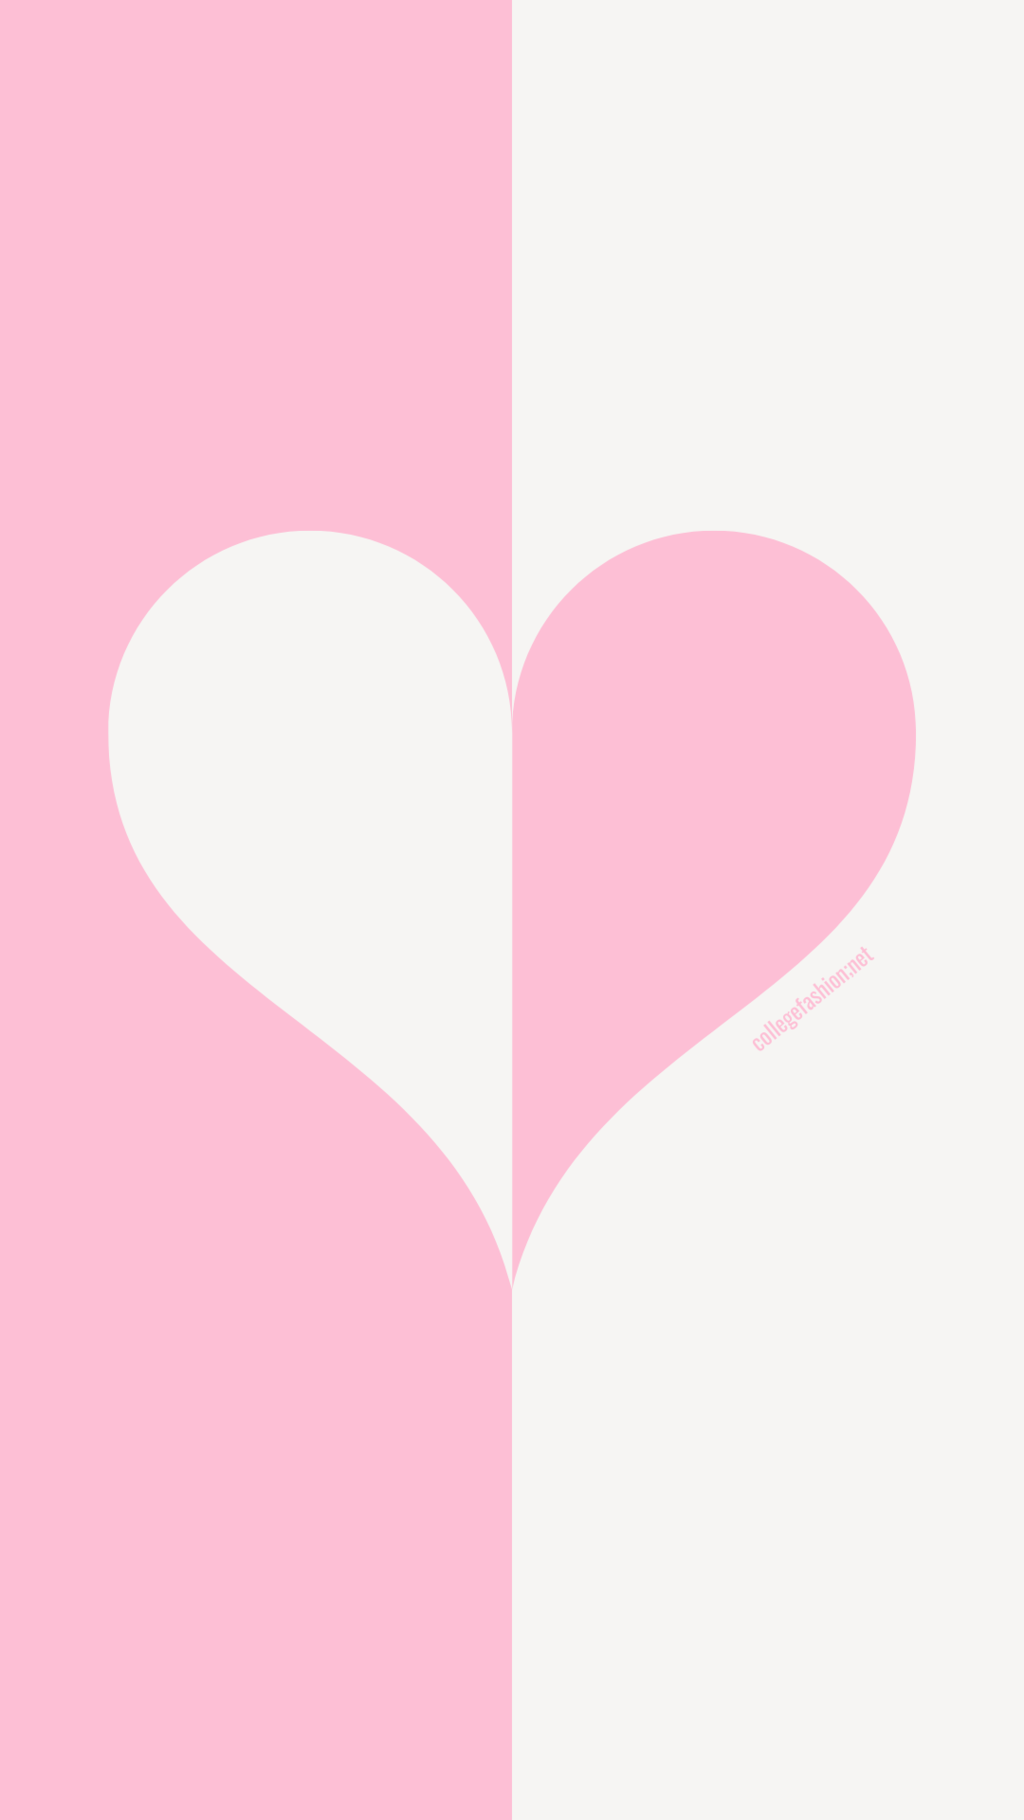 Cute and Aesthetic Valentine's Day Wallpaper